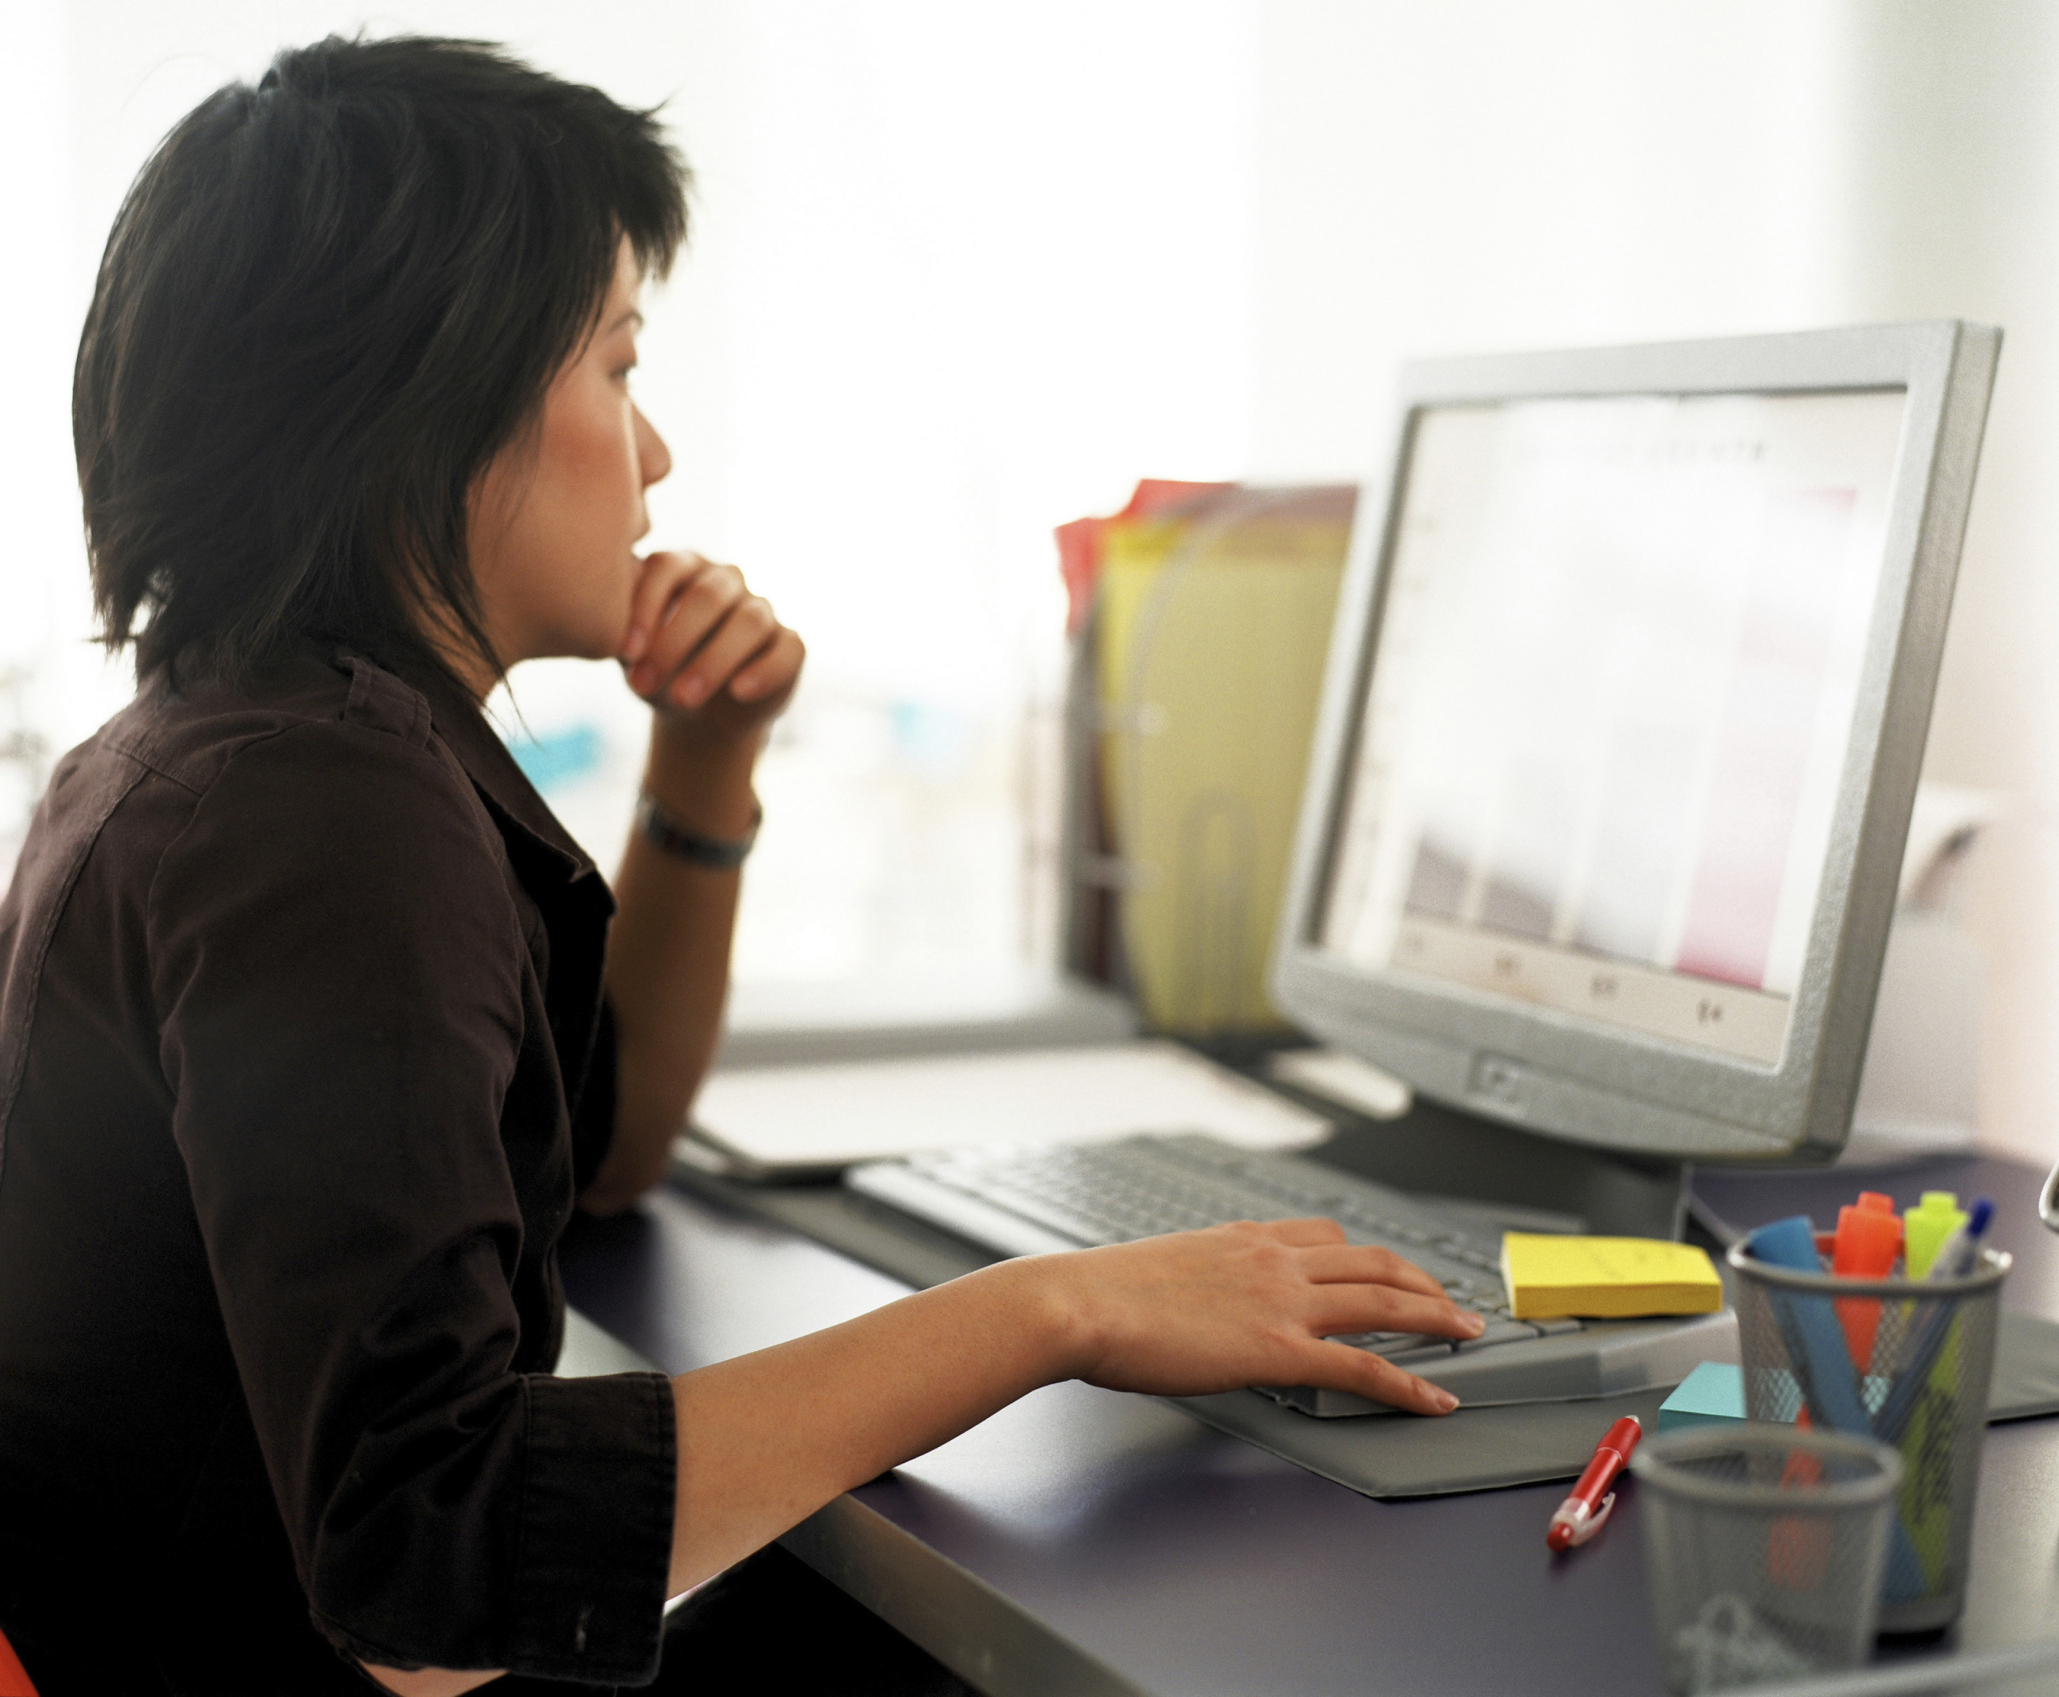 Asian-woman-working-on-laptop-in-office-ThinkstockPhotos-87455862-Ablestock.com